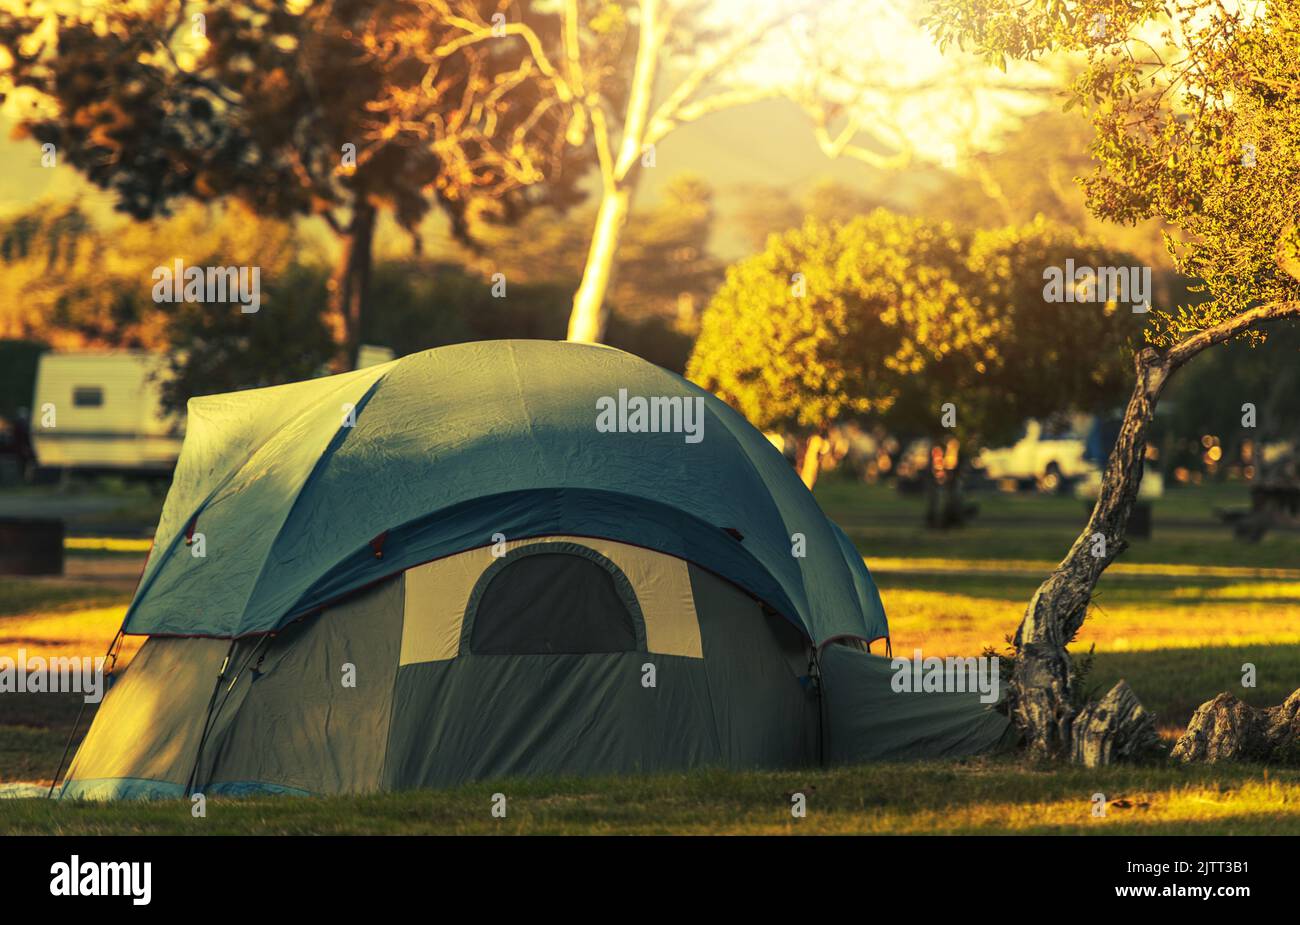 Modern Tent in Khaki Green Color with Additional Roof Protector Cover Pitched and Secured on a Campground. Fall Foliage in the Background. Camping and Stock Photo